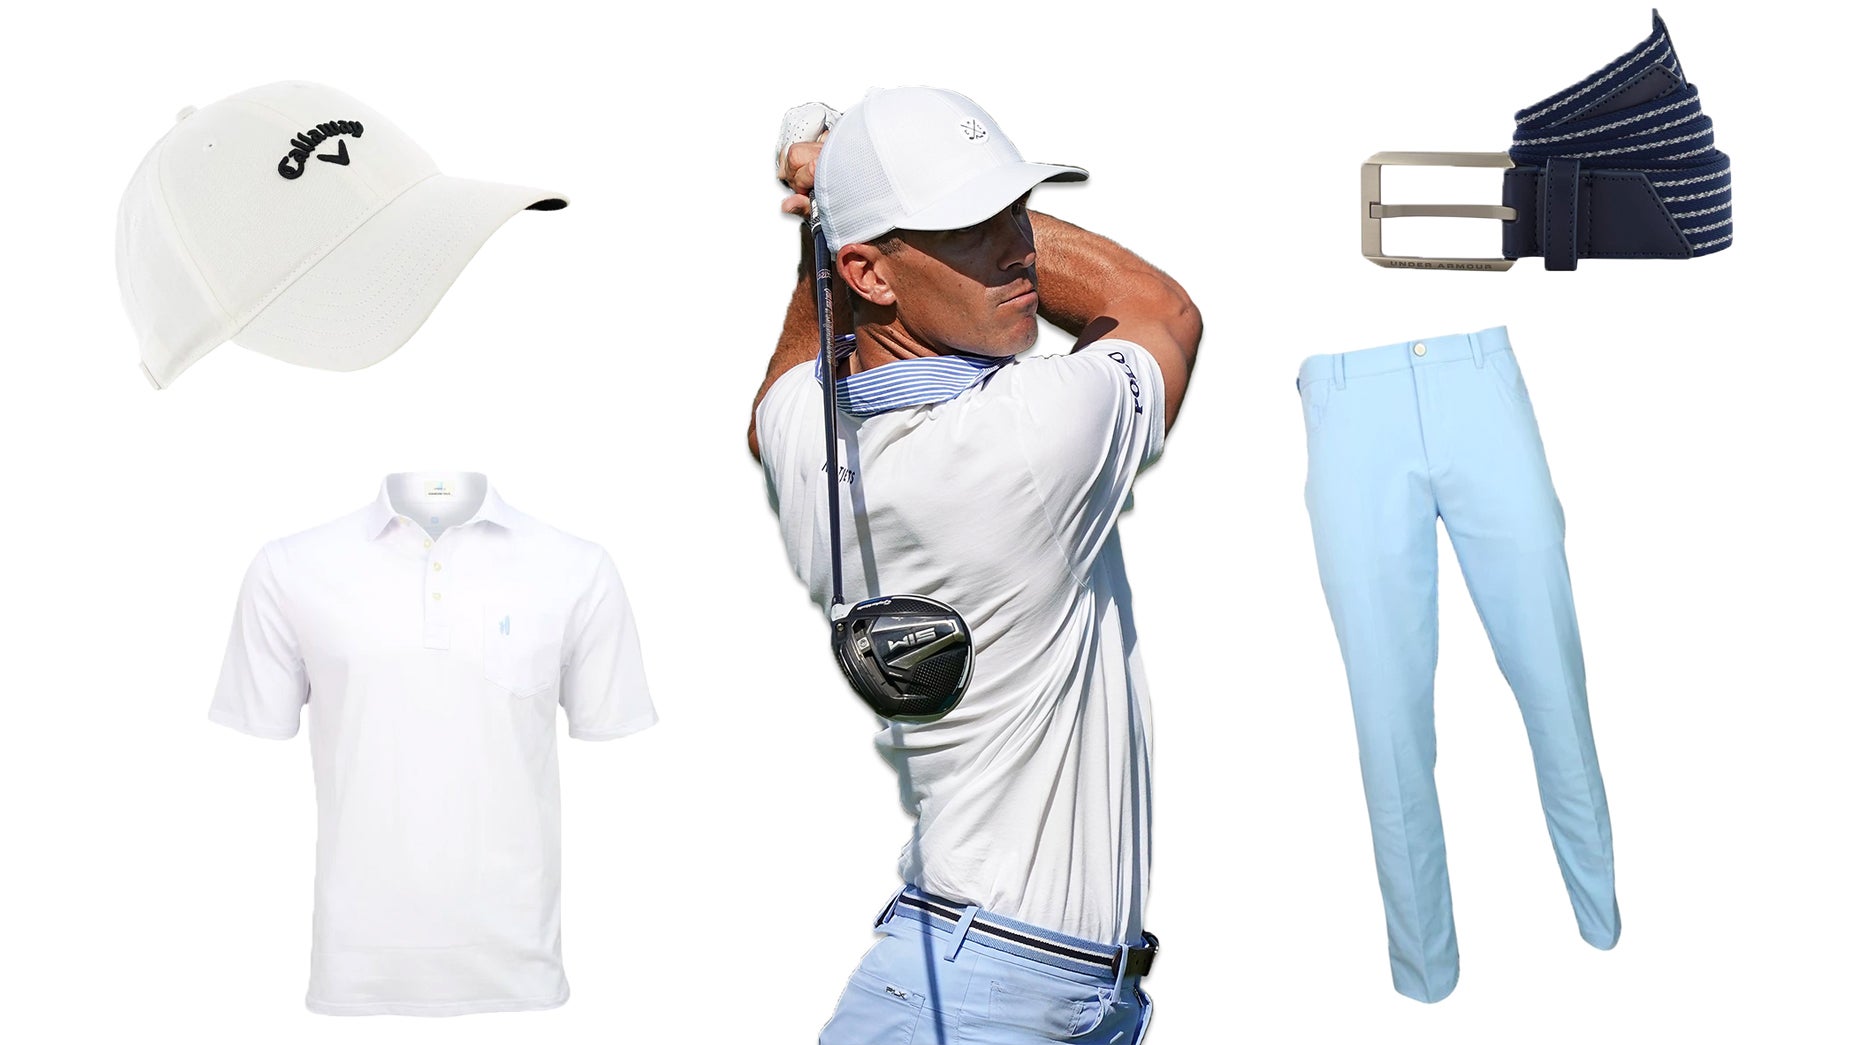 Dress like Billy Horschel: Put some prep in your step